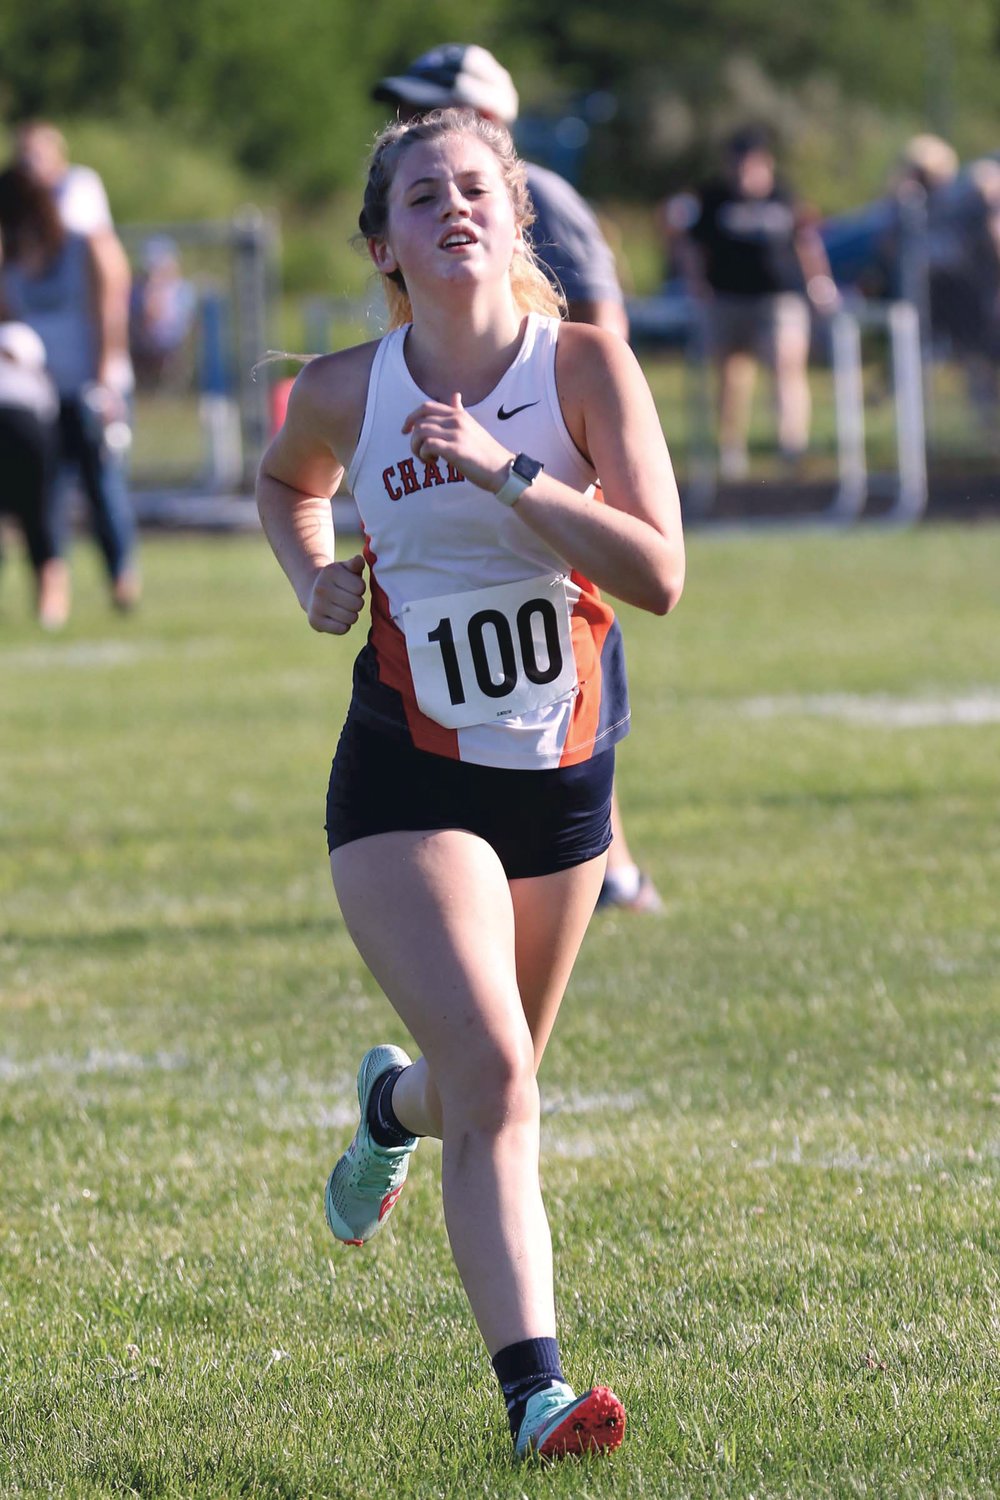 Claire Bonwell of North Montgomery finished 55th in a time of 25:48.